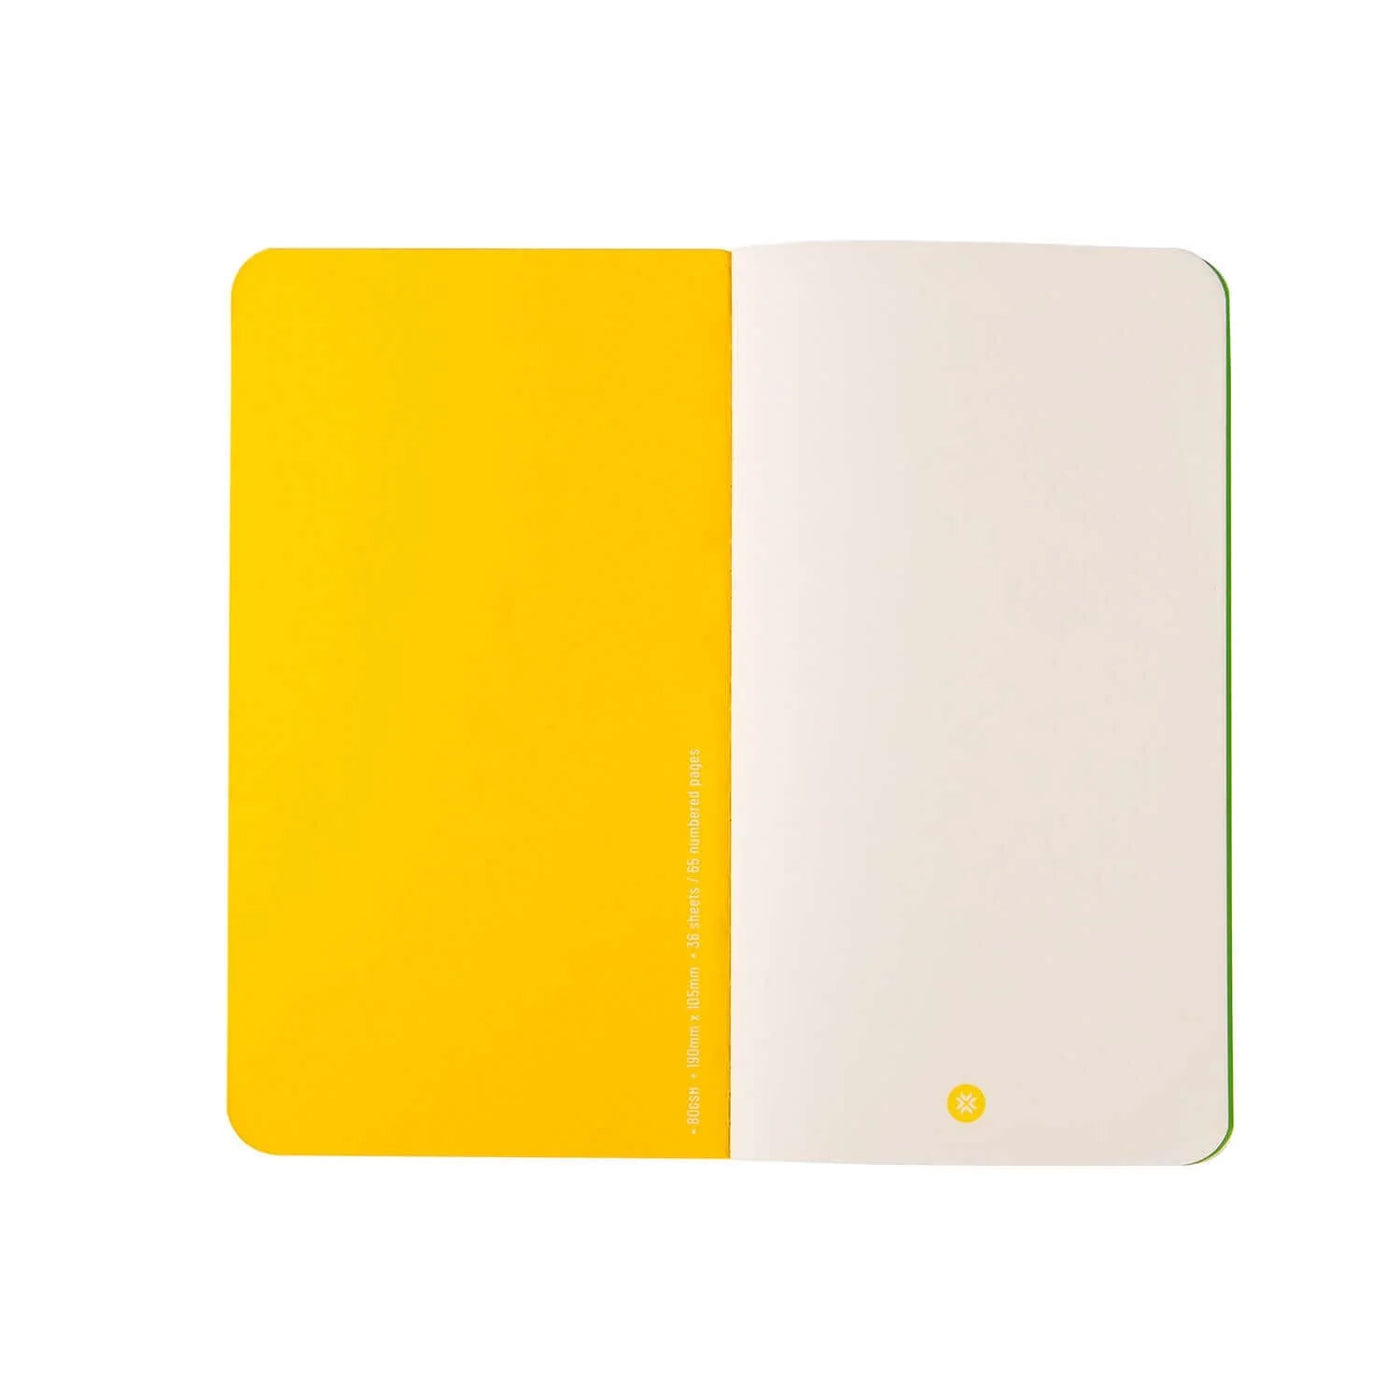 Pennline Quikfill Notebook Refill For Quikrite, Yellow Green - Set Of 2 6